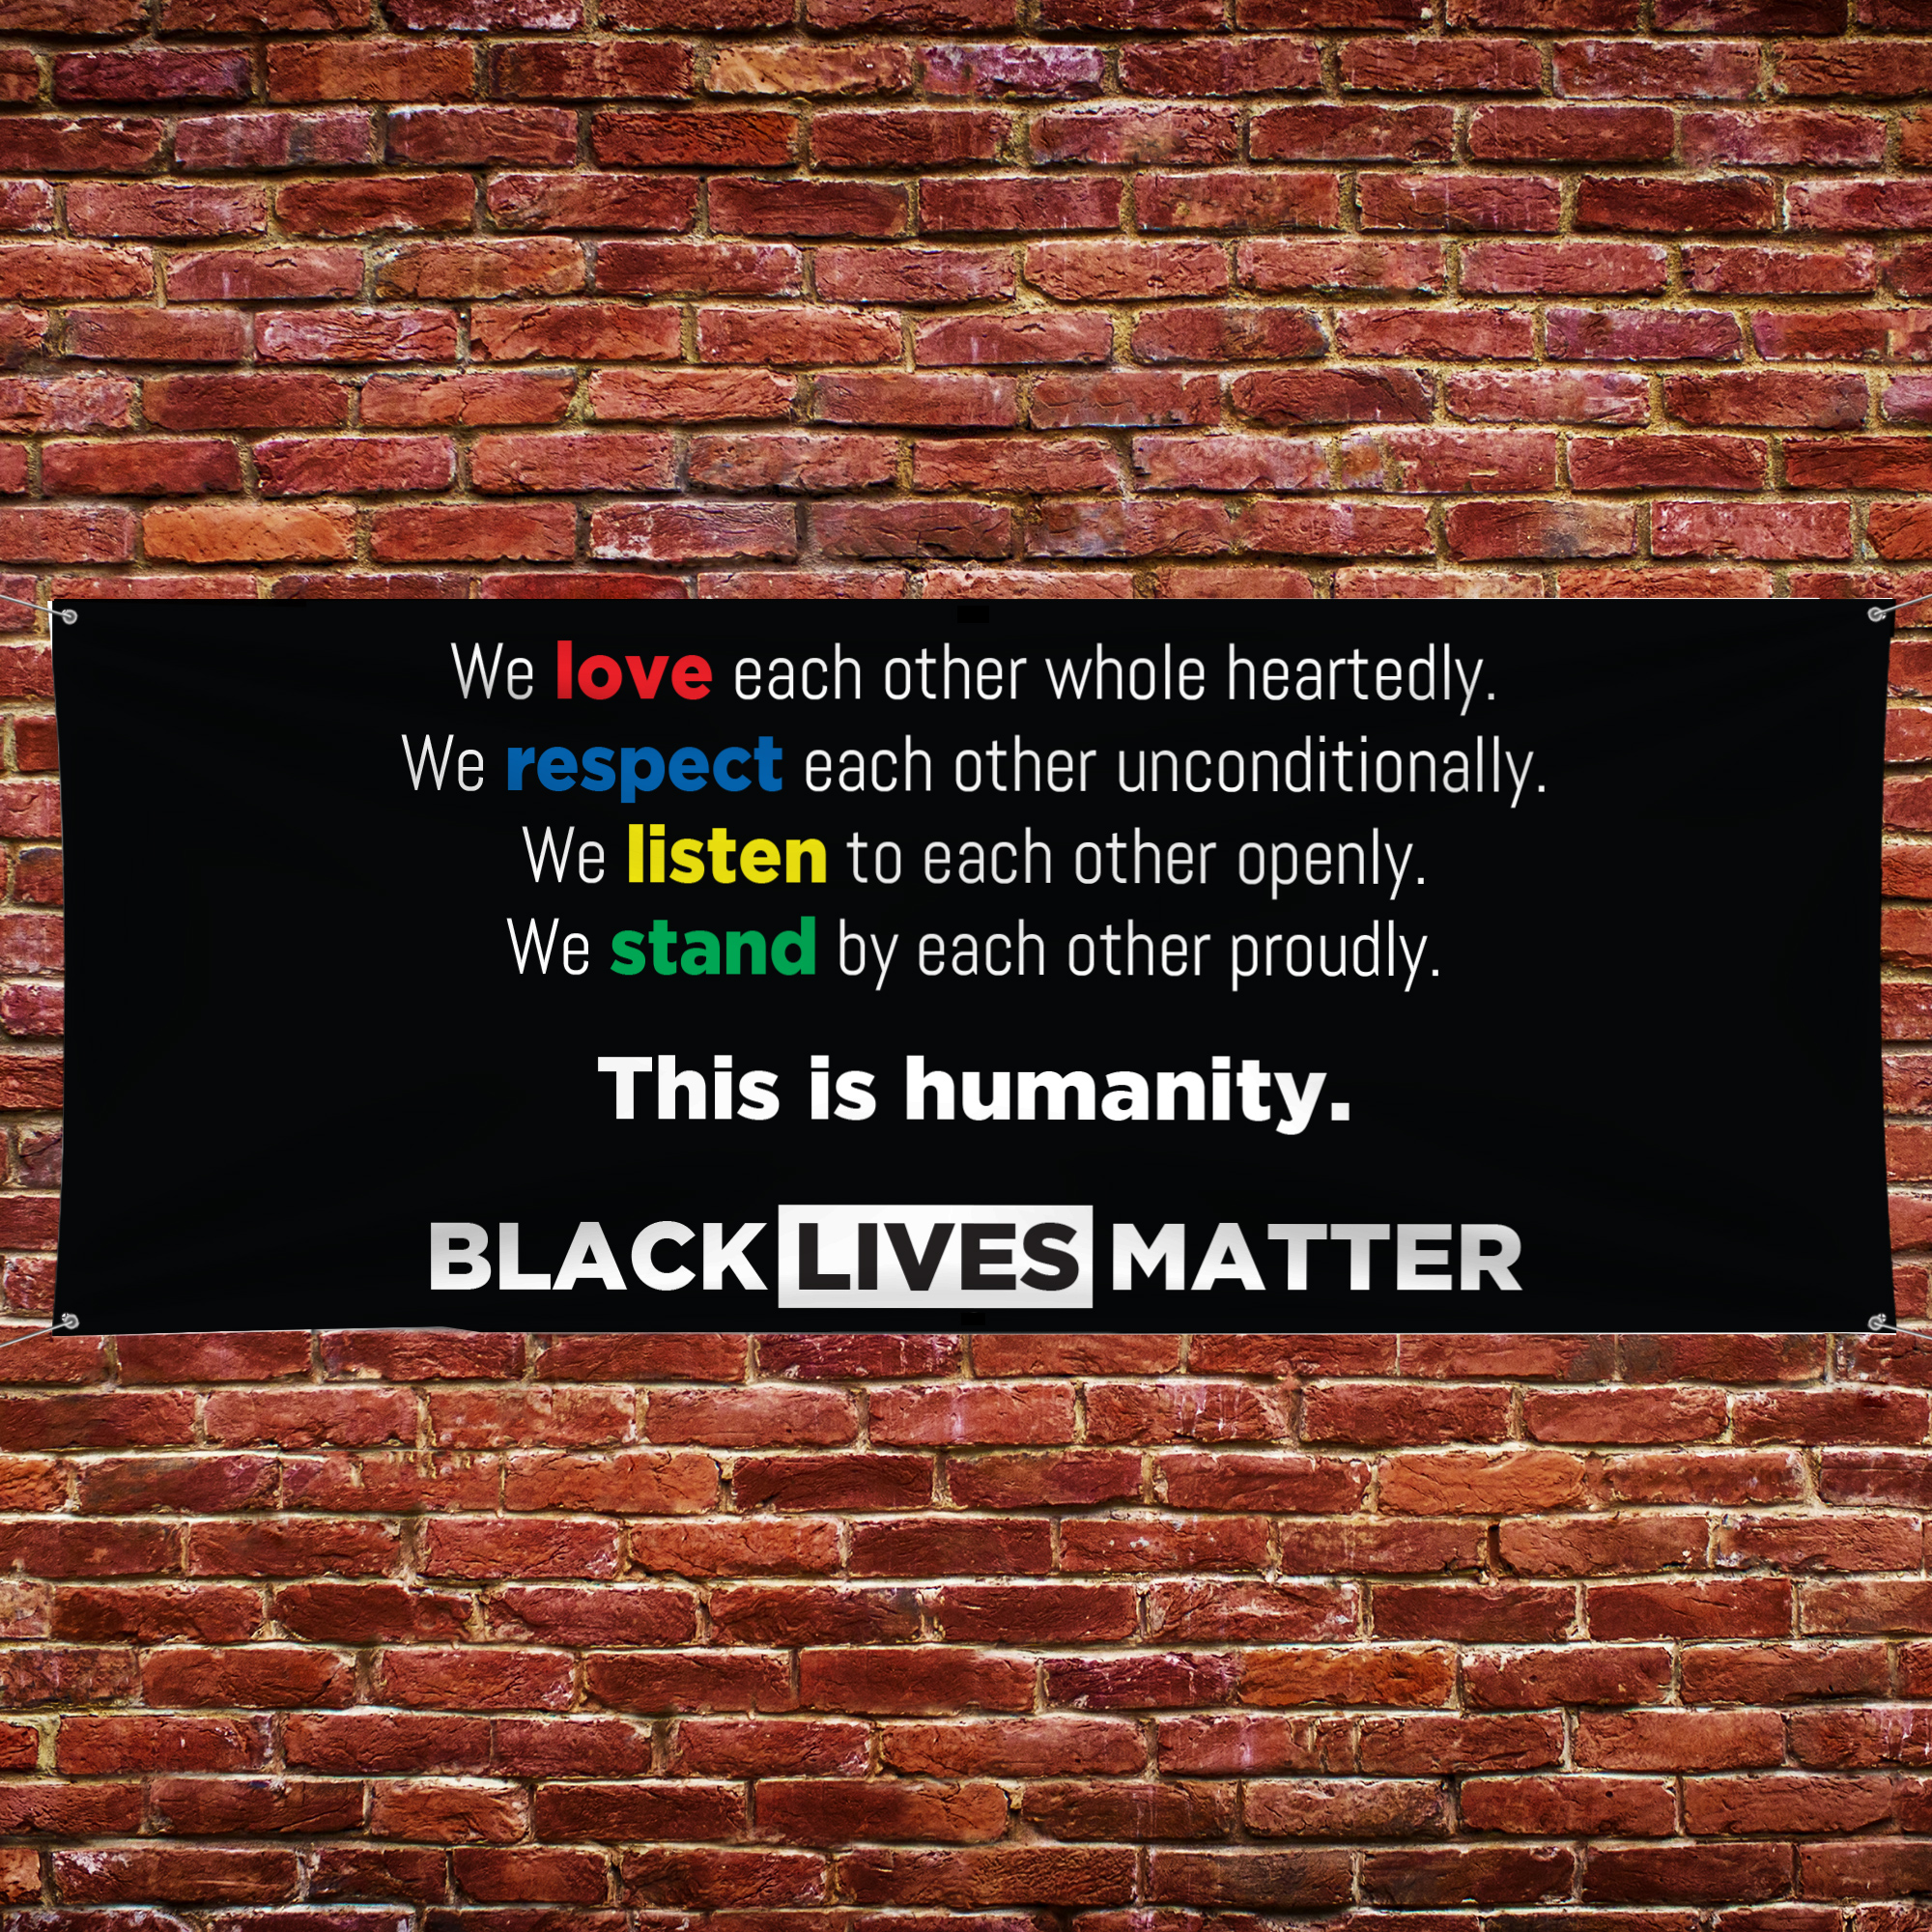 BLACK LIVES MATTER - This is Humanity - Vinyl Banner